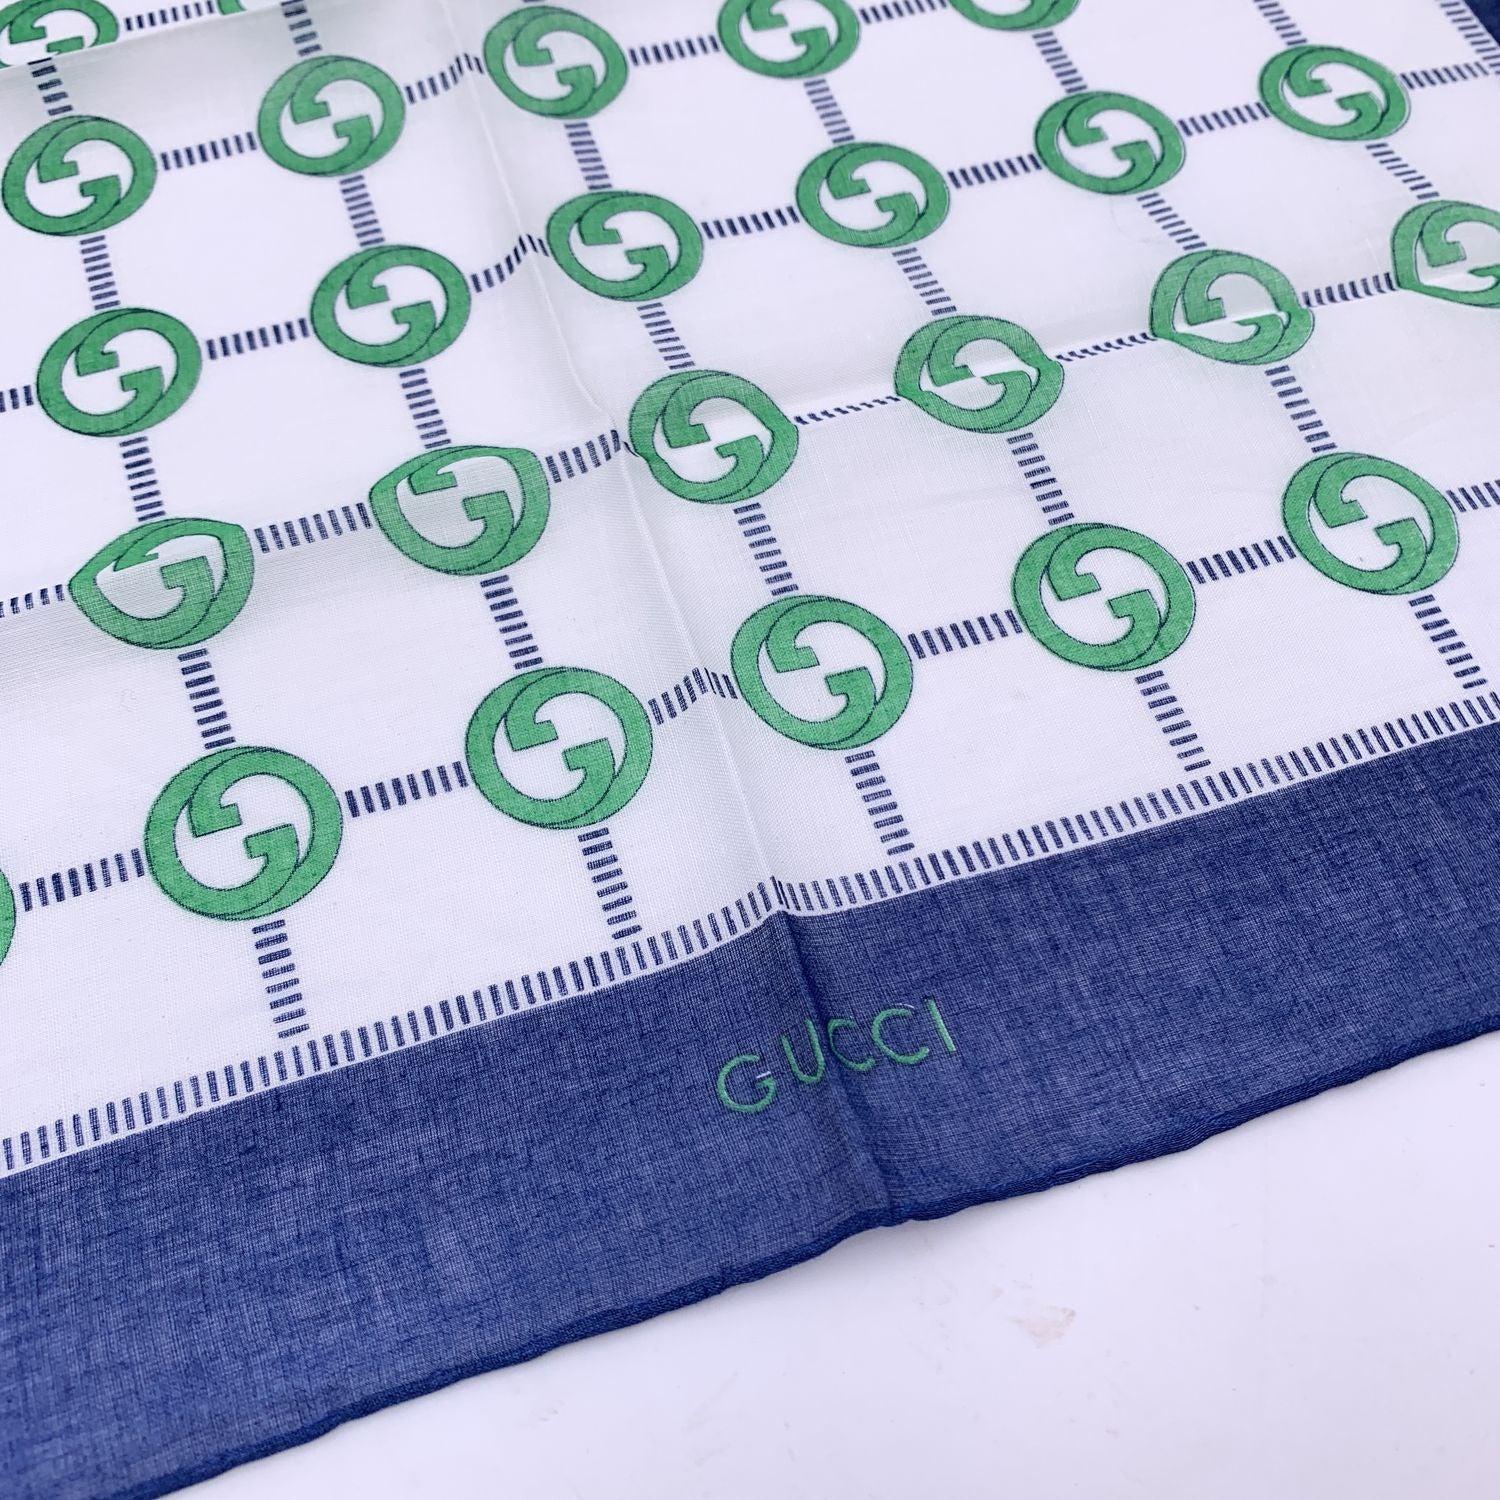 Vintage neck scarf by GUCCI. 100% Cotton. Green GG logos with blue borders. 'Gucci' signature printed on the lower center border. Approx. Measurements: 16.5 x 16.5 inches - 42 x 42 cm Details MATERIAL: Cotton COLOR: Blue MODEL: n.a. GENDER: Women